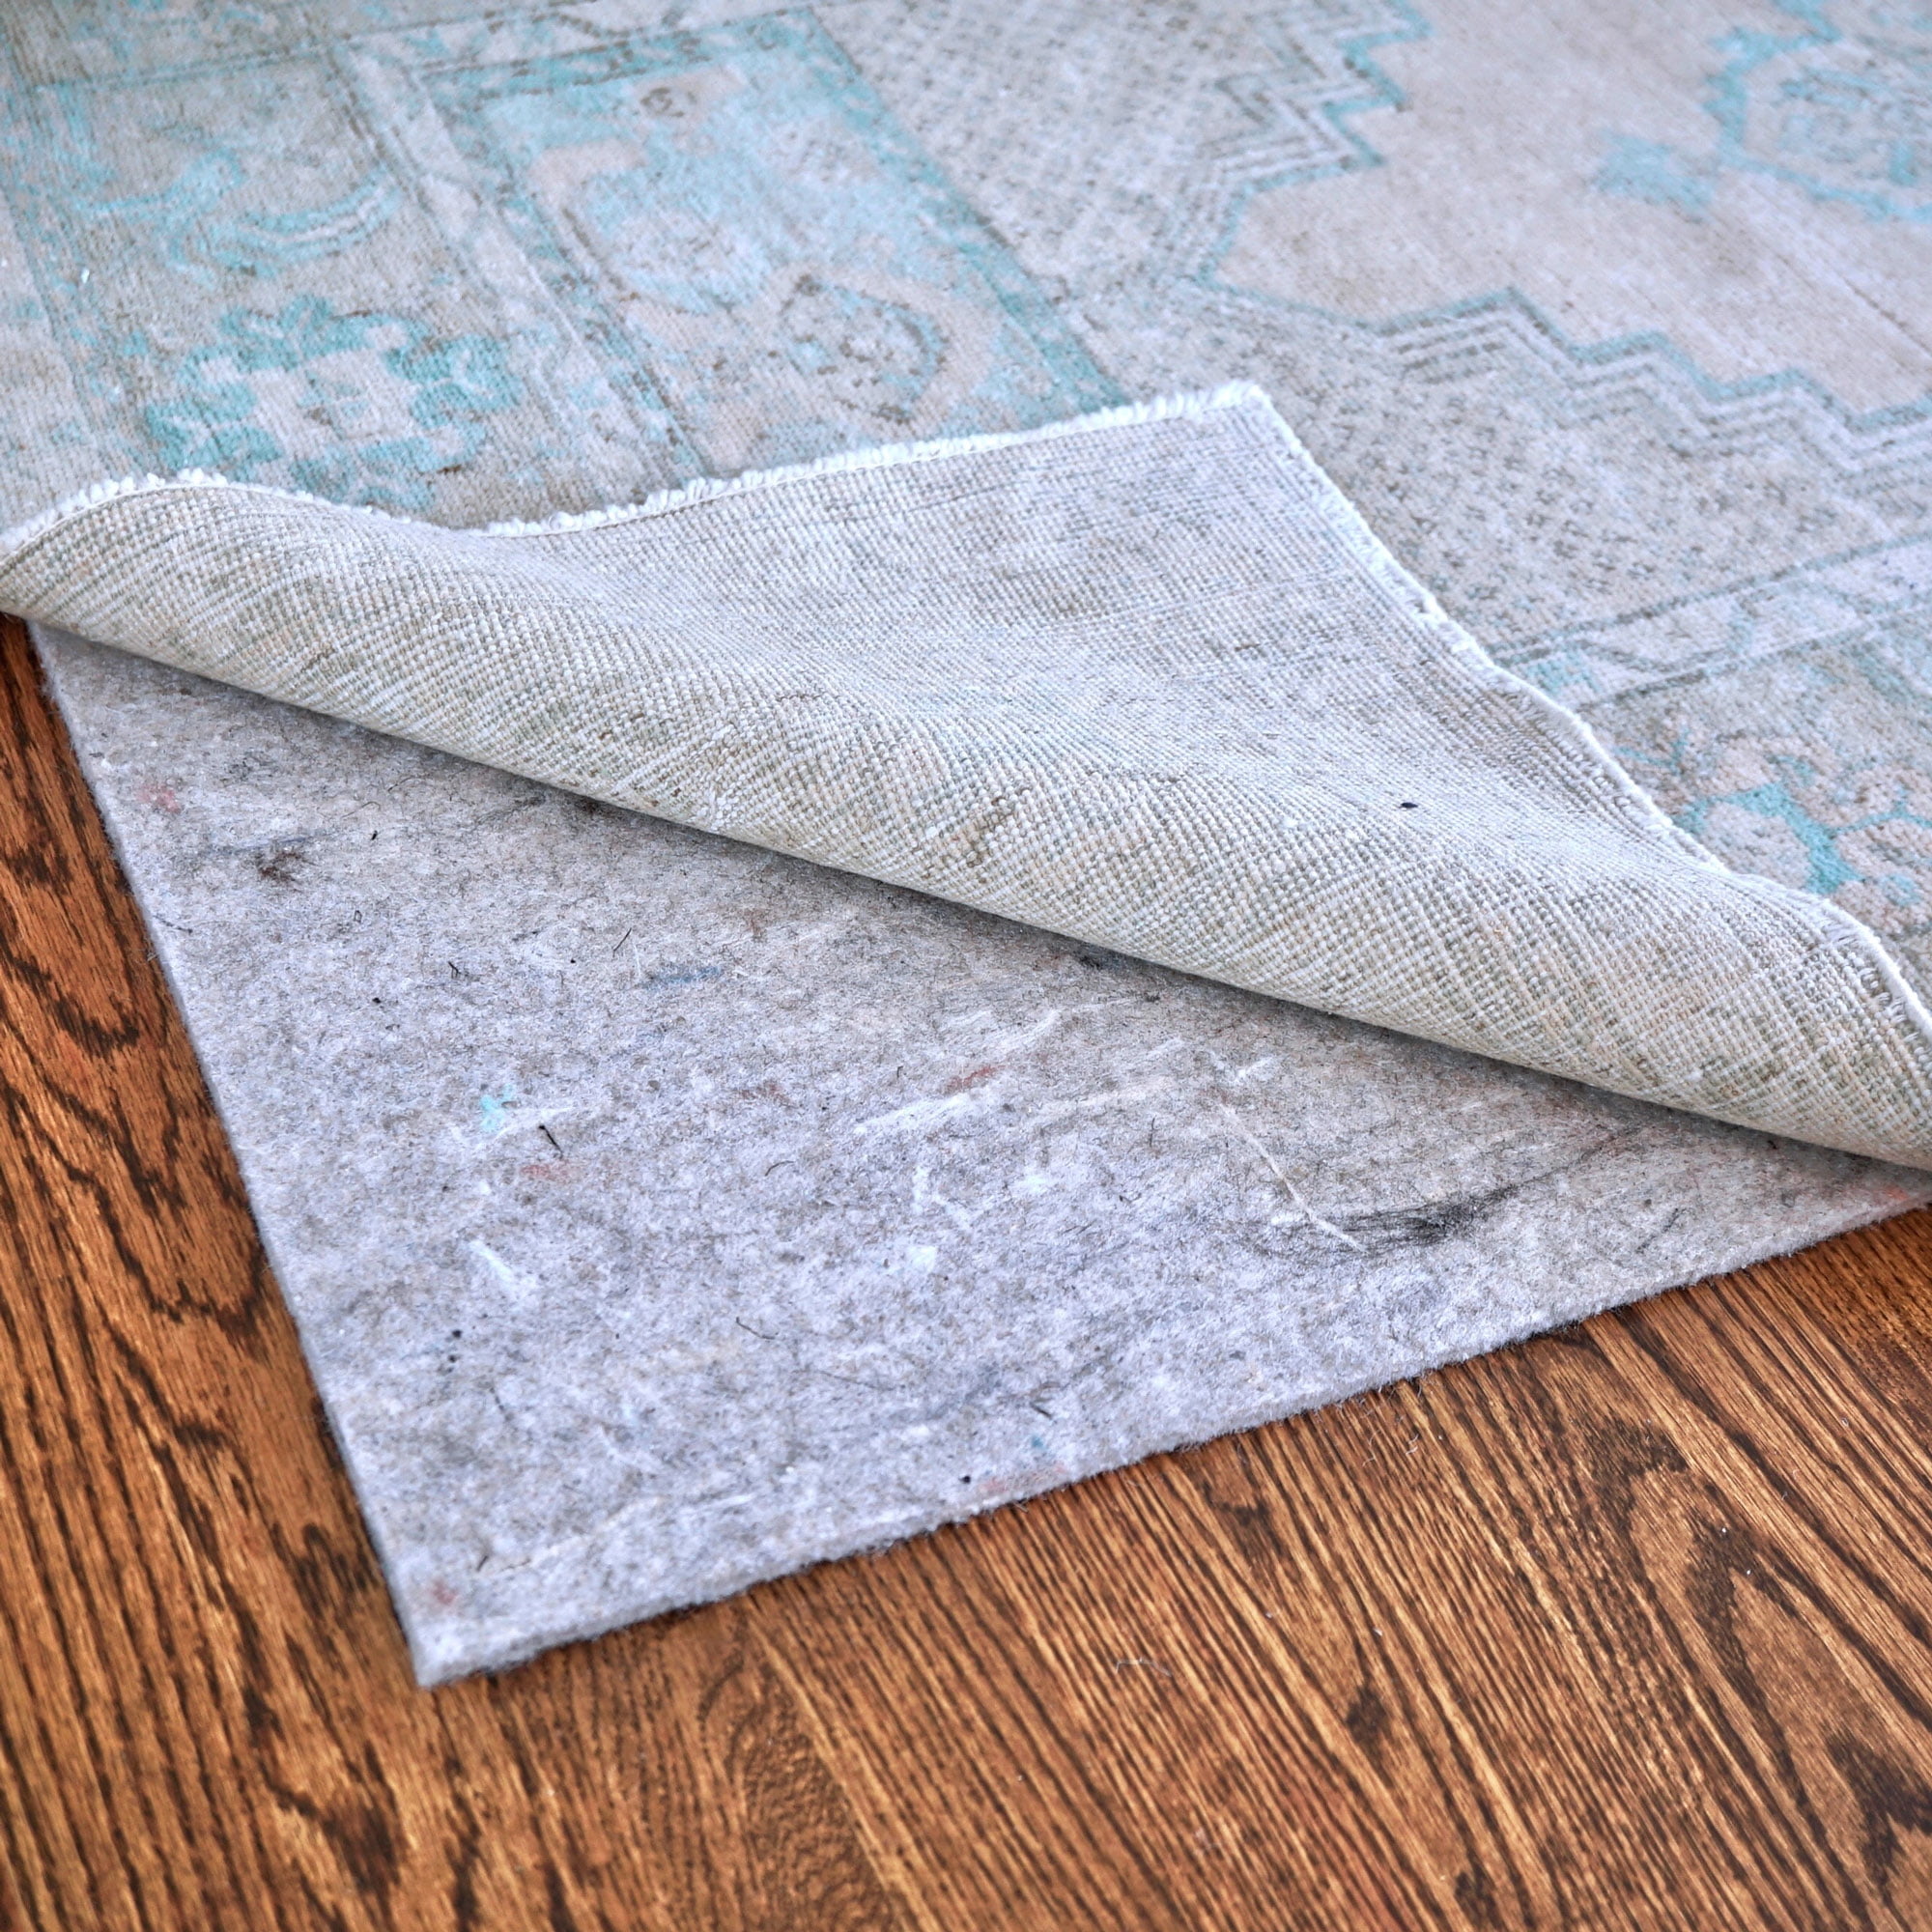 RugPadUSA Essentials 2 ft. 6 in. x 9 ft. Runner Felt + Rubber Non-Slip 1/8 in. Thick Rug Pad